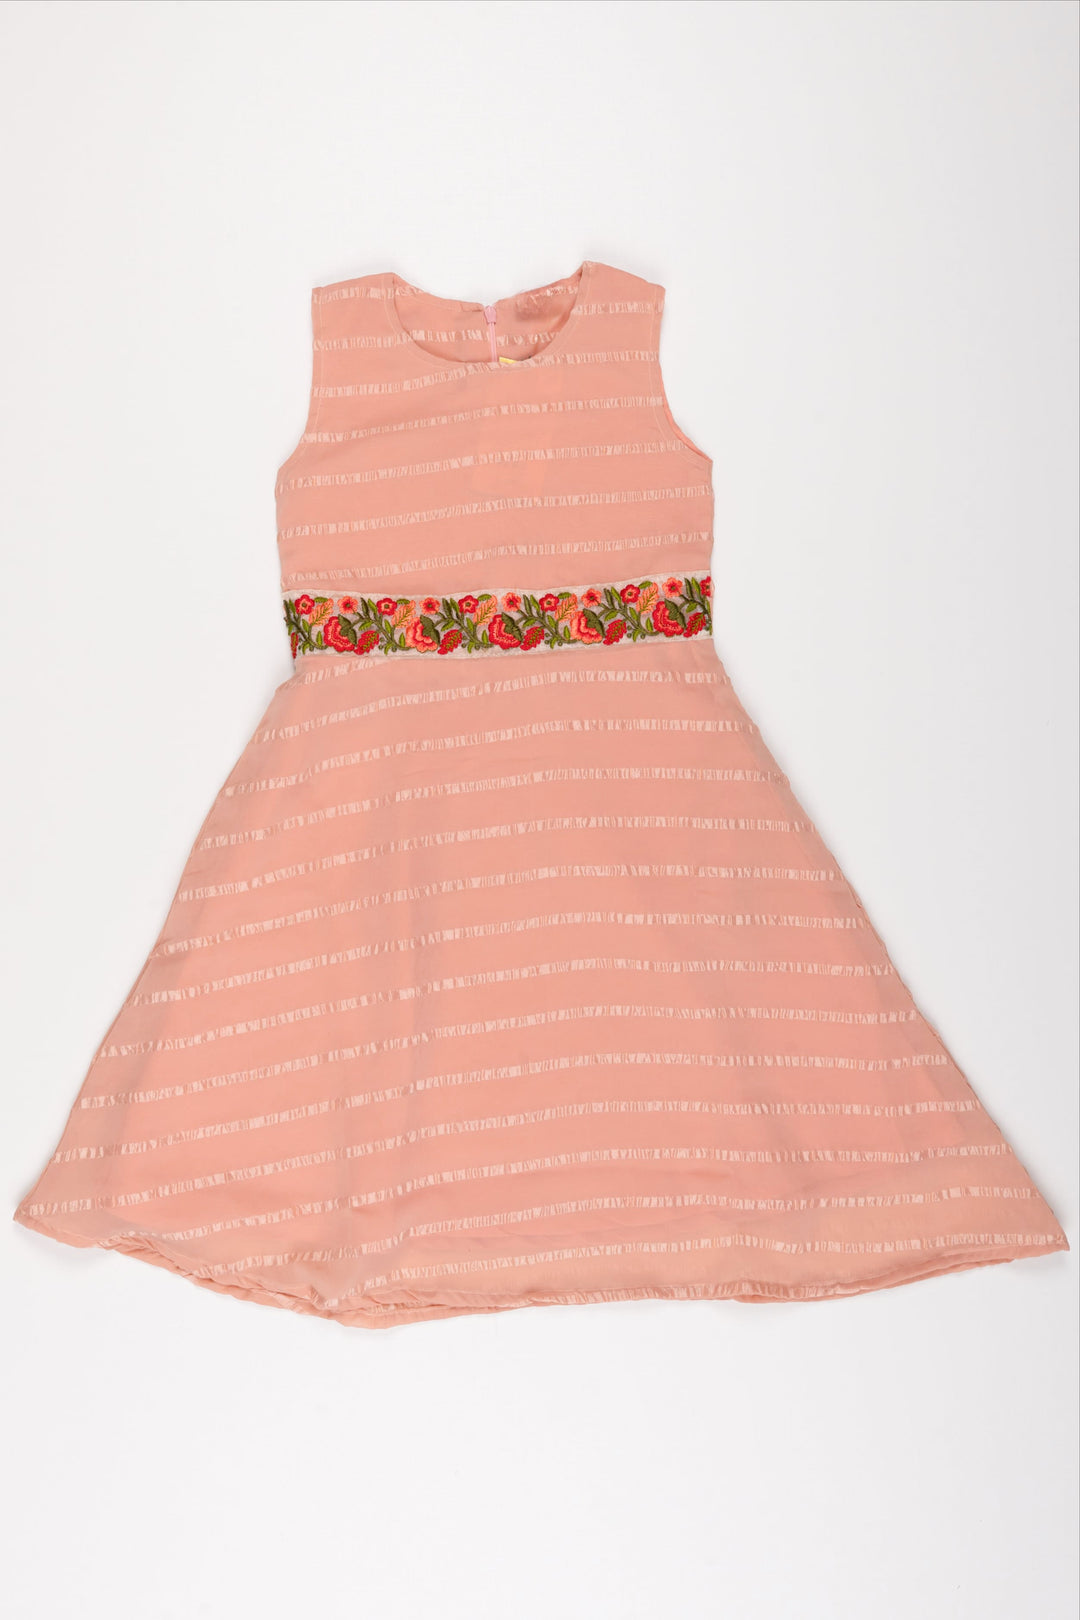 The Nesavu Girls Fancy Frock Orange Perfection Fancy Frock: Delicate Embroidery and Soft Stripes for Girls Nesavu 18 (2Y) / Orange GFC1212C-18 Girls Orange Cotton Embroidered Frock | Elegant Party Wear for Kids | The Nesavu